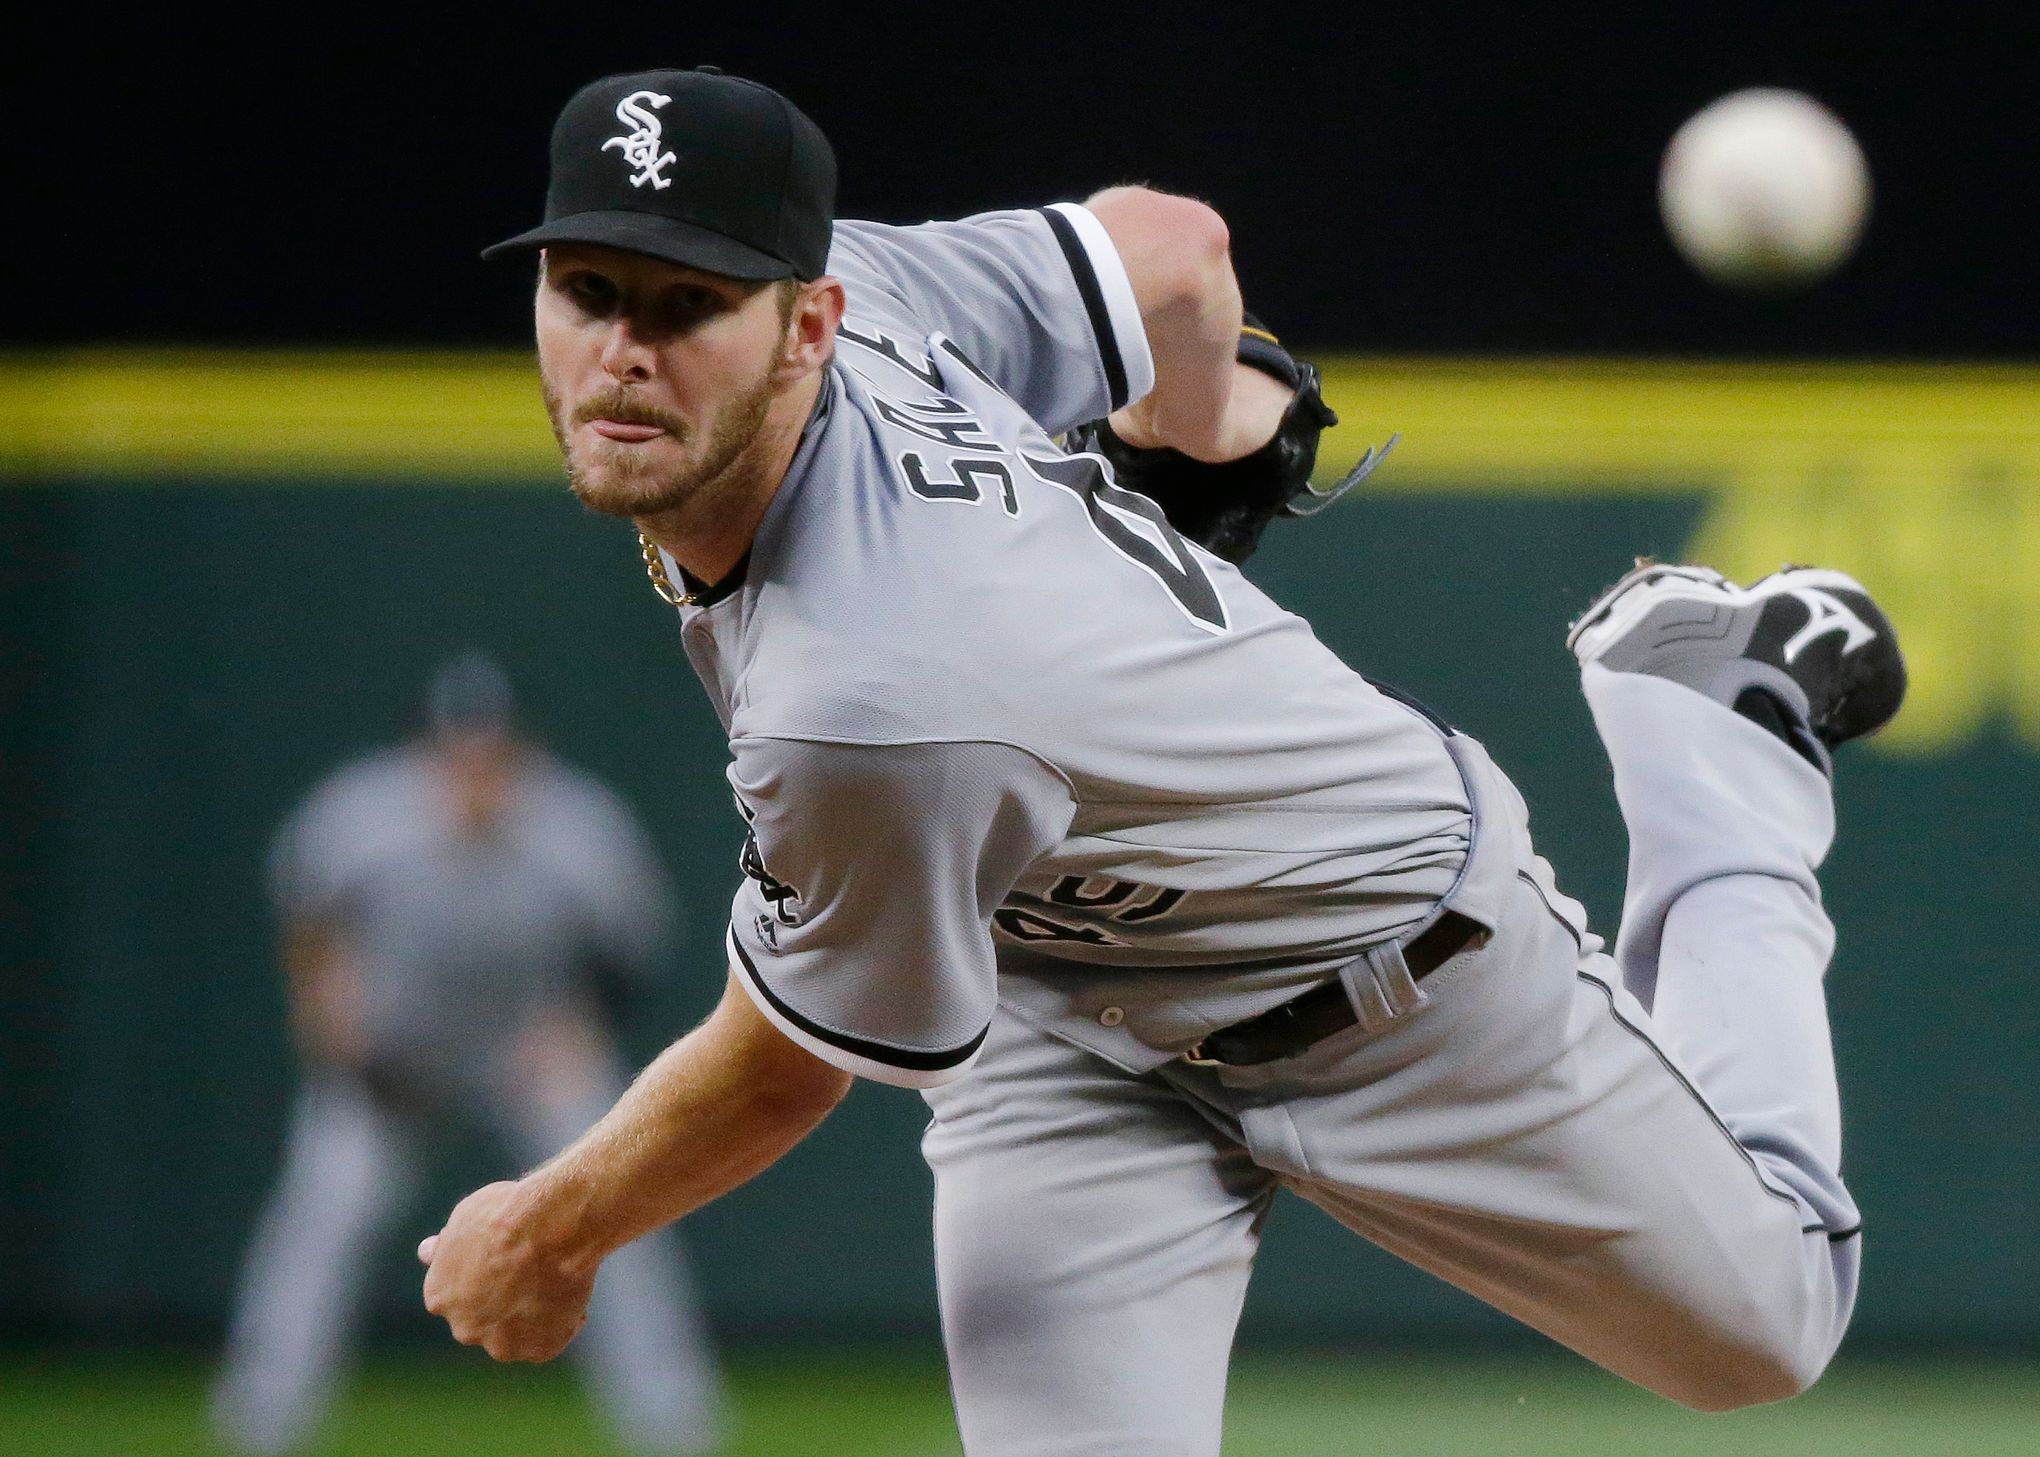 White Sox's Chris Sale not crazy, just competitive